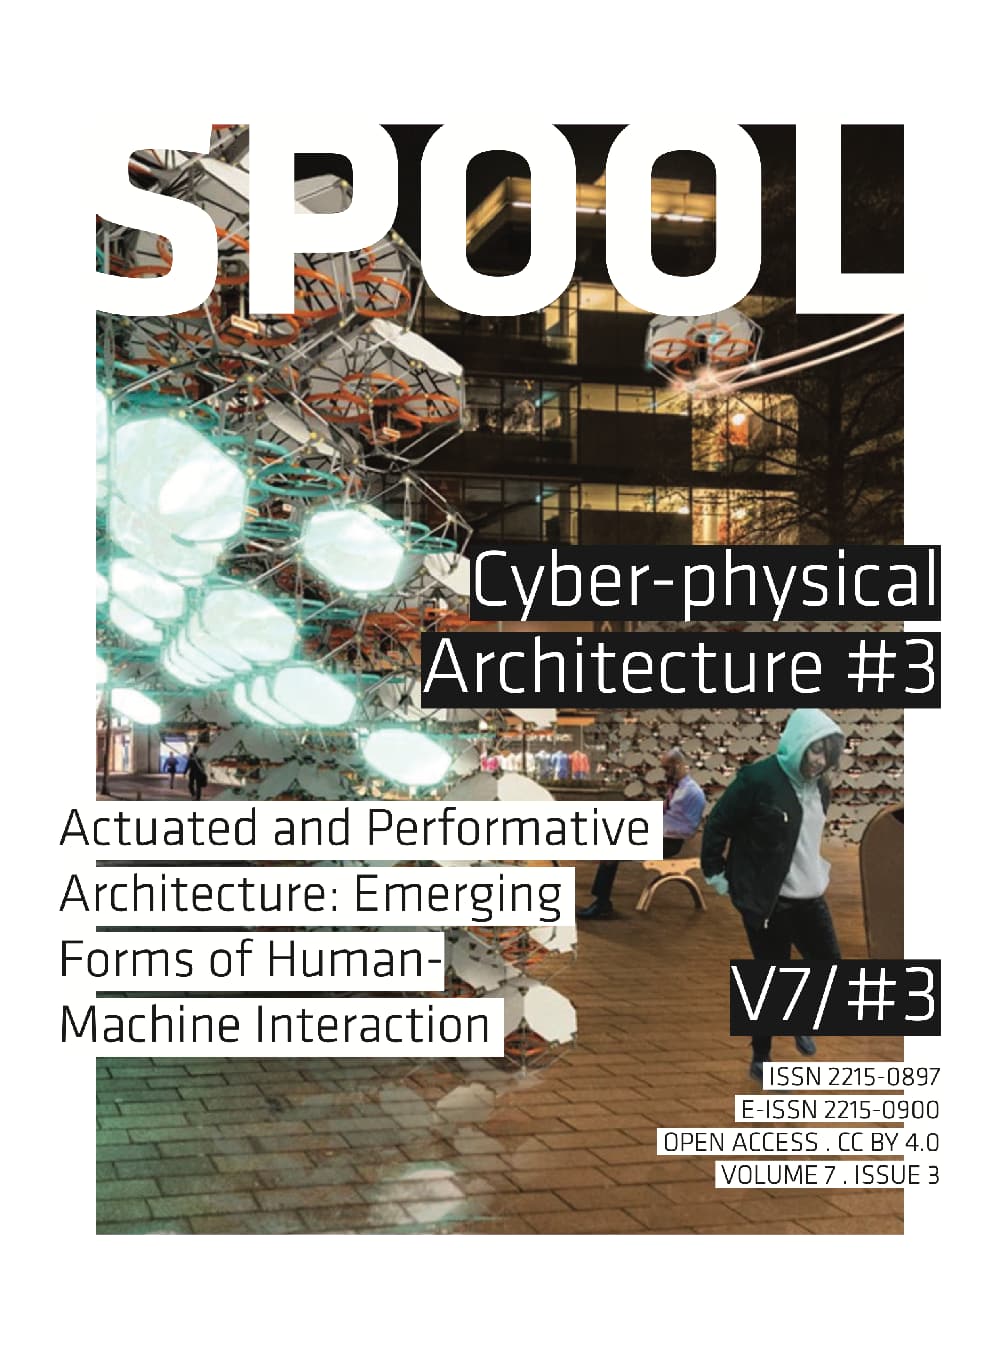 						View Vol. 7 No. 3: Cyber-physical Architecture #3
					